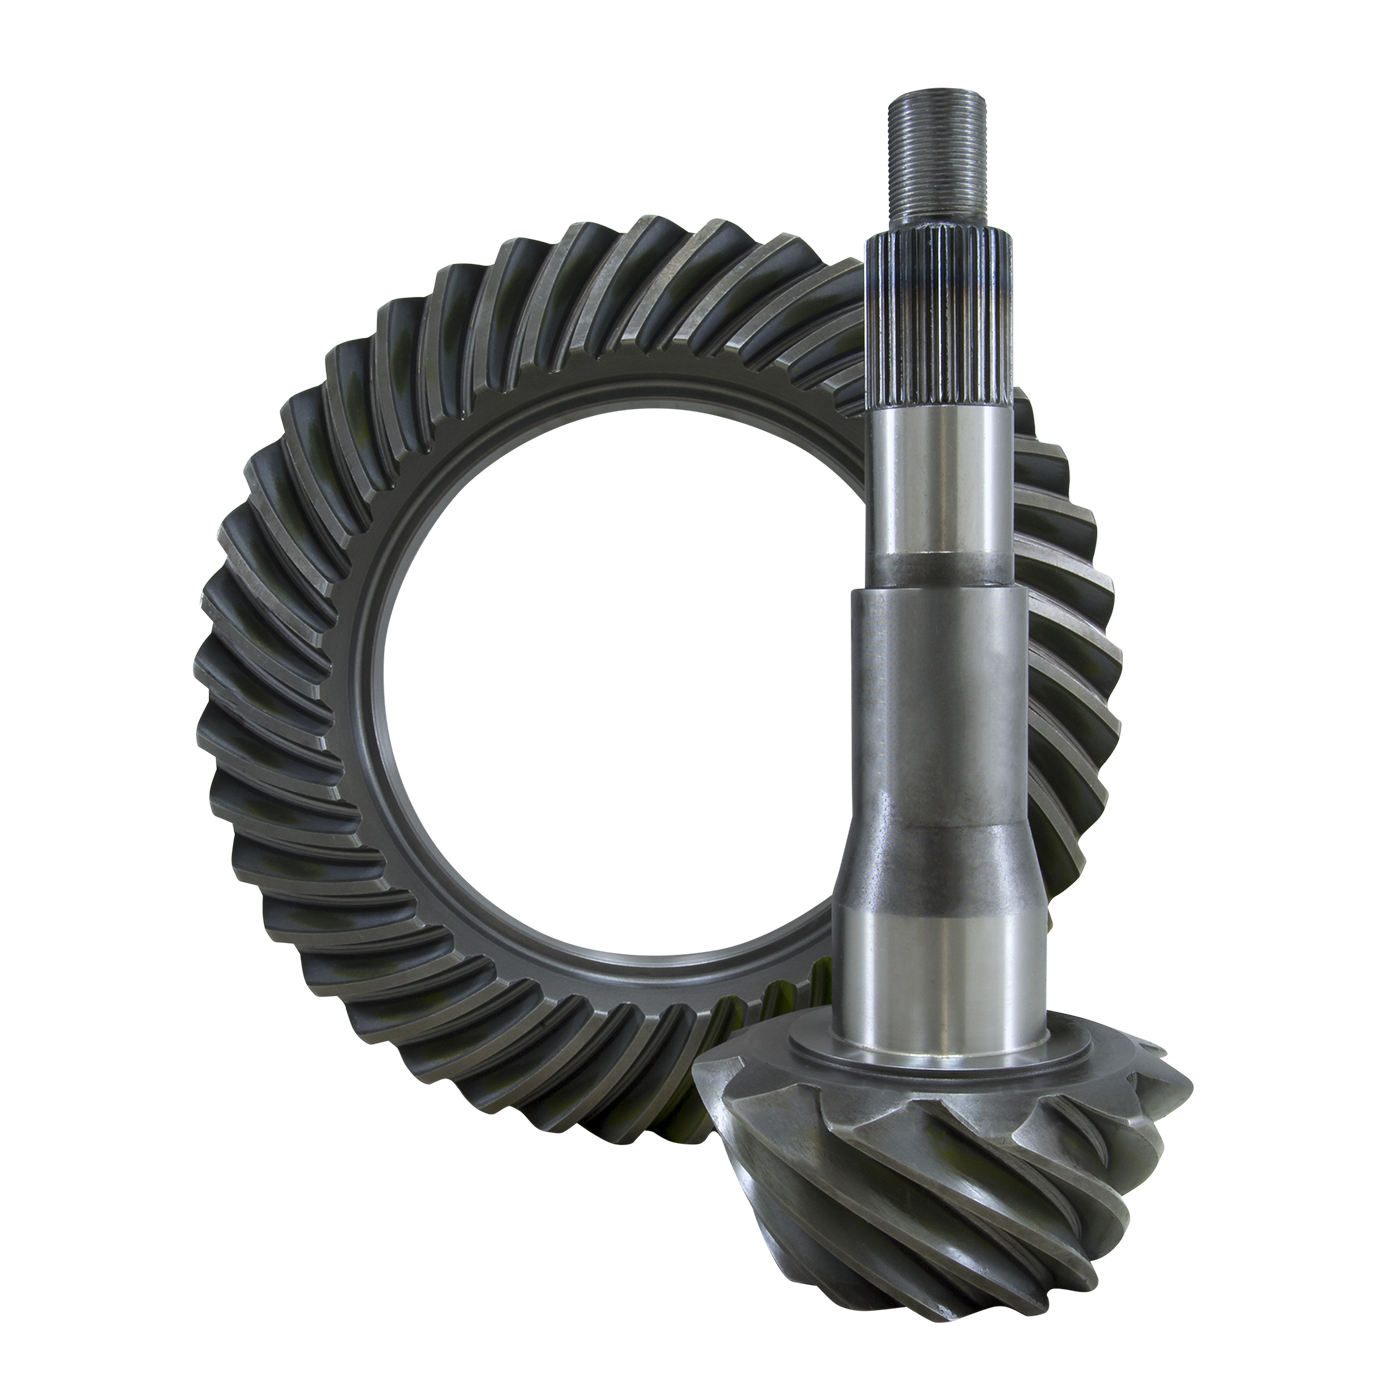 Show details for Yukon Gear & Axle YG F10.5-373-31 High Performance Yukon Ring/pinion Gear Set For 10/down 10.5in. In A 3.73 .